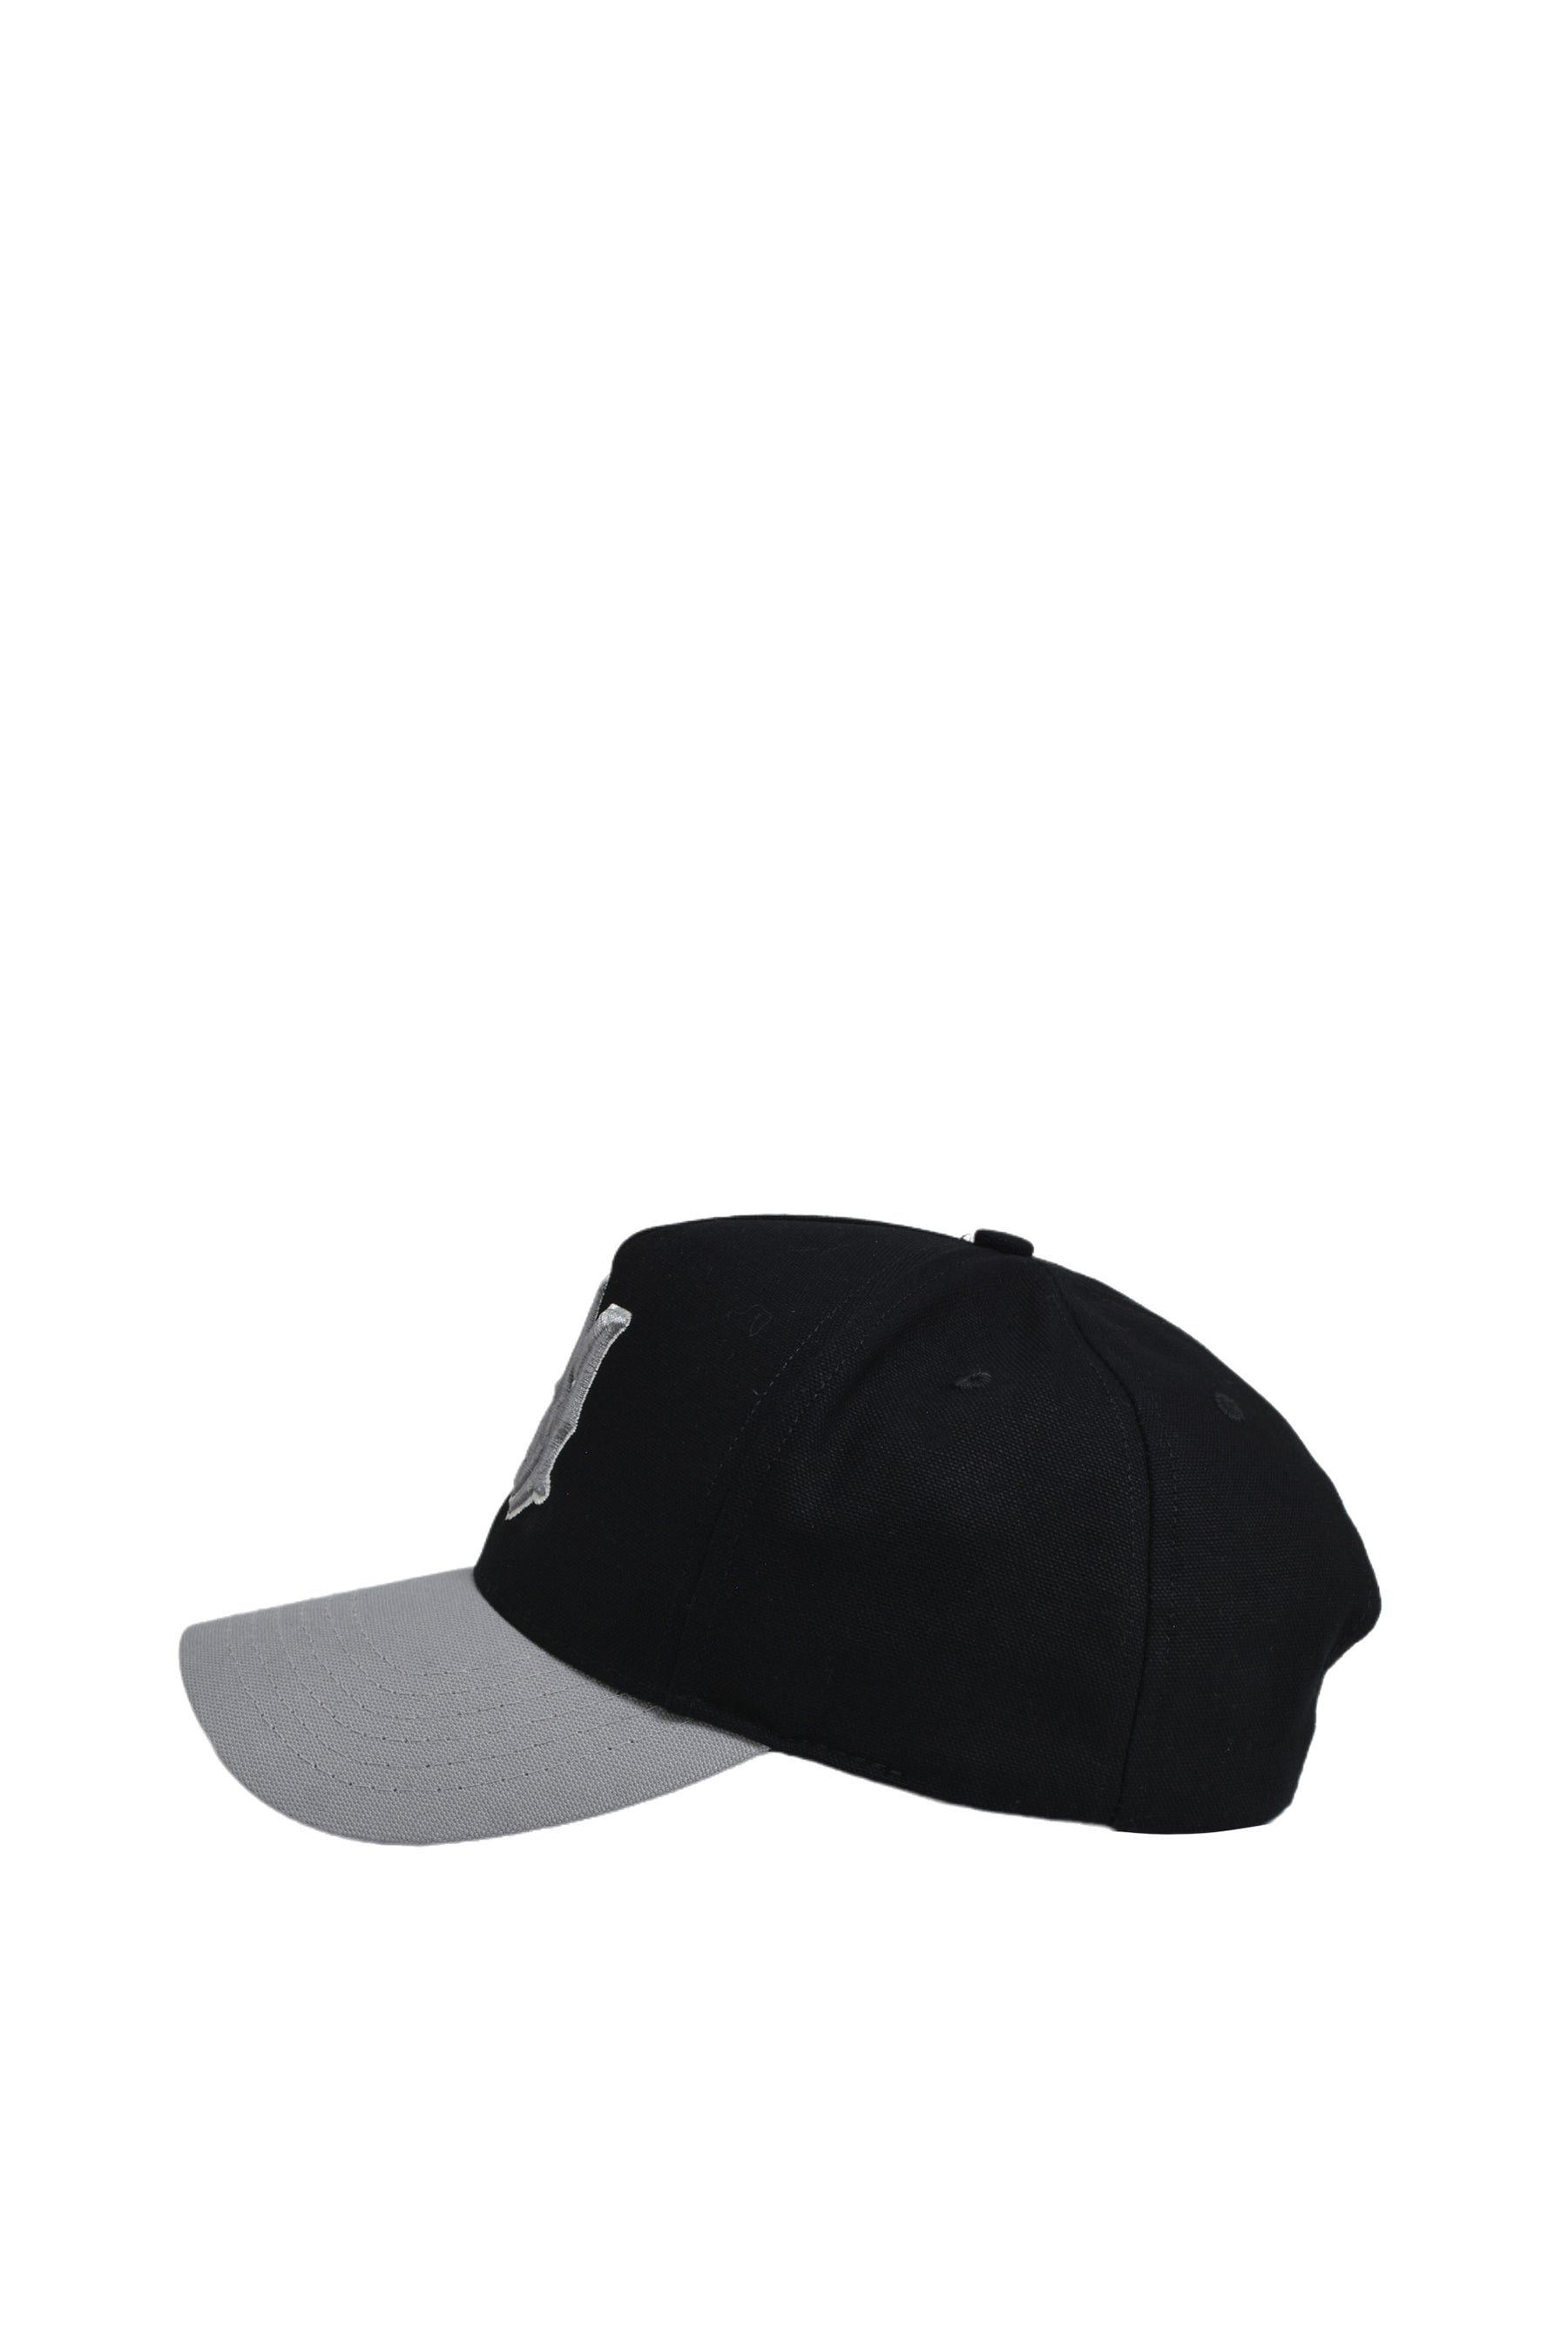 MA CANVAS HAT / BLK GRY